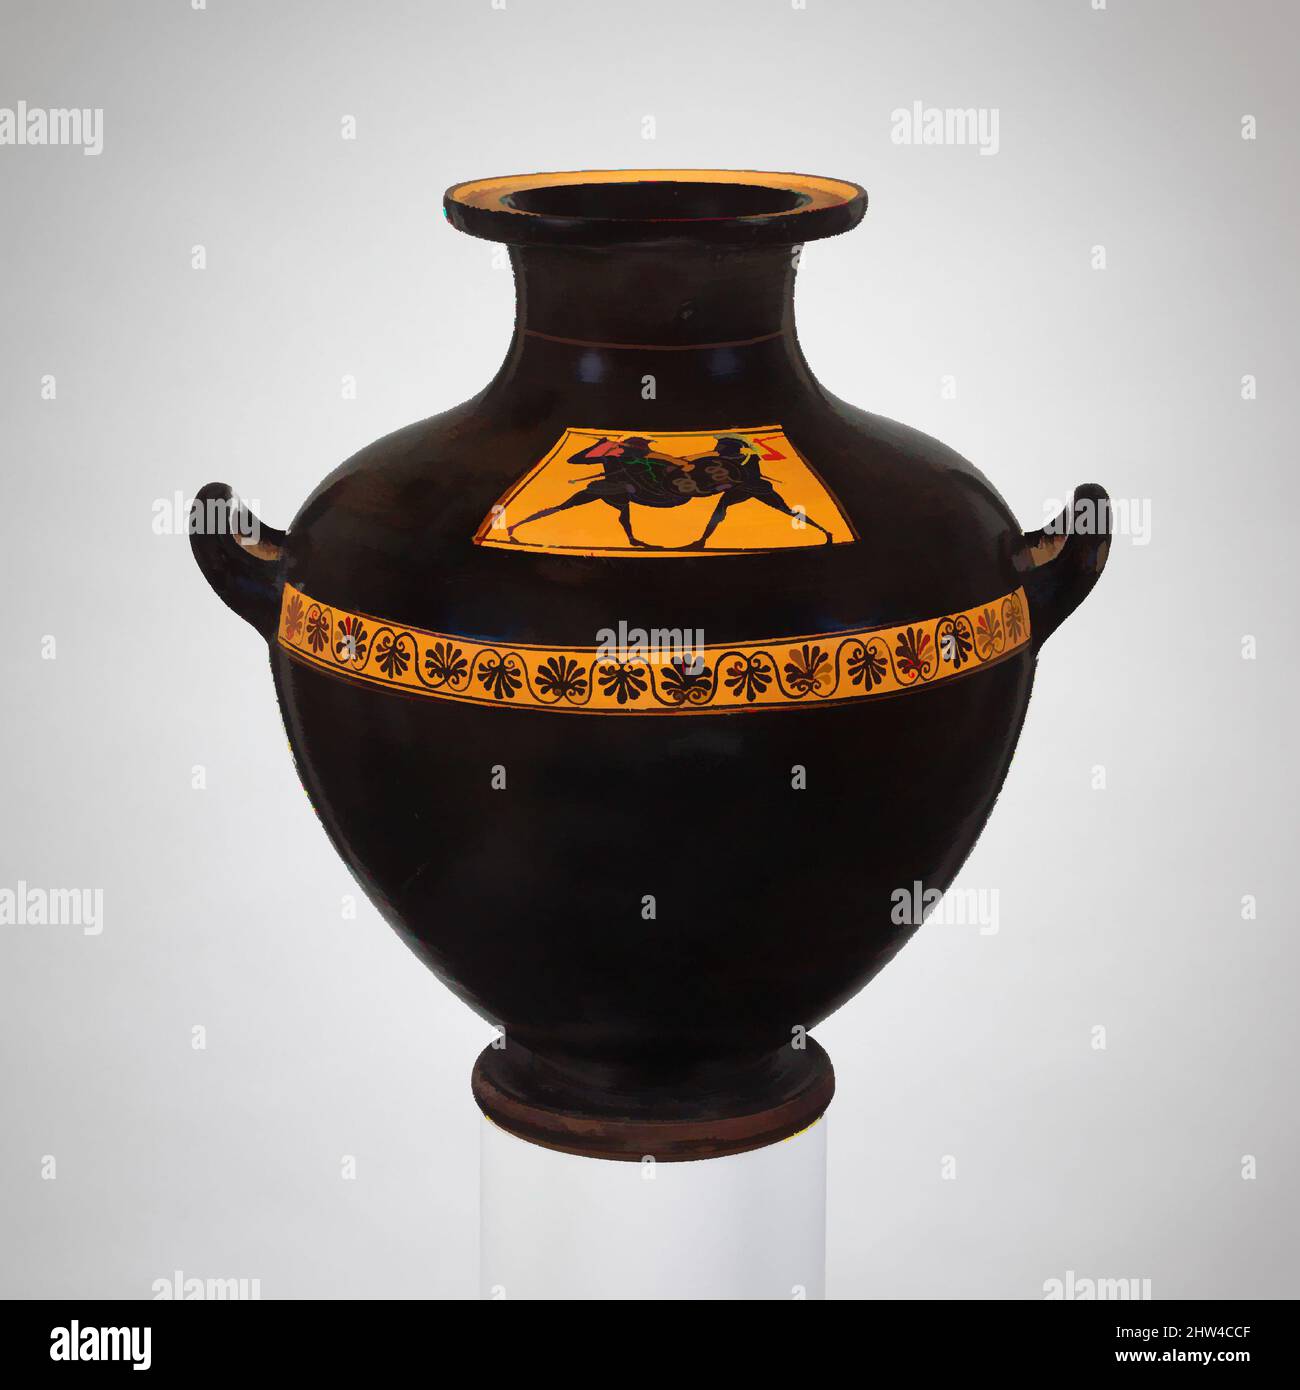 Art inspired by Terracotta hydria: kalpis (water jar), Archaic, ca. 510 B.C., Greek, Attic, Terracotta; black-figure, H. 13 in. (33 cm), Vases, On the shoulder, two warriors in combat. The shape and the glossy black glaze contribute decisively to the elegance and power of the hydria, Classic works modernized by Artotop with a splash of modernity. Shapes, color and value, eye-catching visual impact on art. Emotions through freedom of artworks in a contemporary way. A timeless message pursuing a wildly creative new direction. Artists turning to the digital medium and creating the Artotop NFT Stock Photo